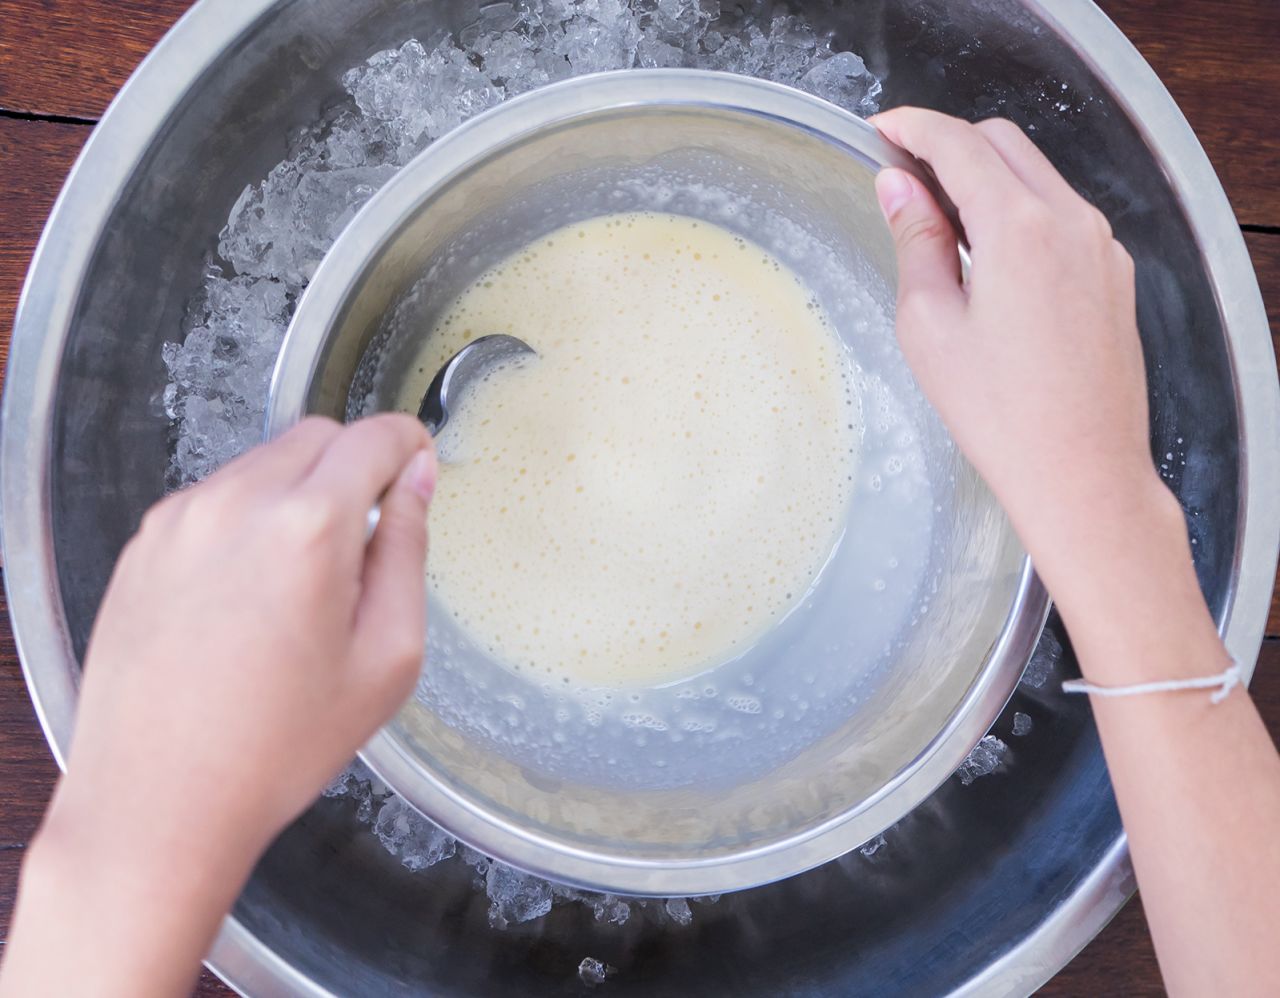 Churning an ice cream base by hand, in an ice cold bowl.